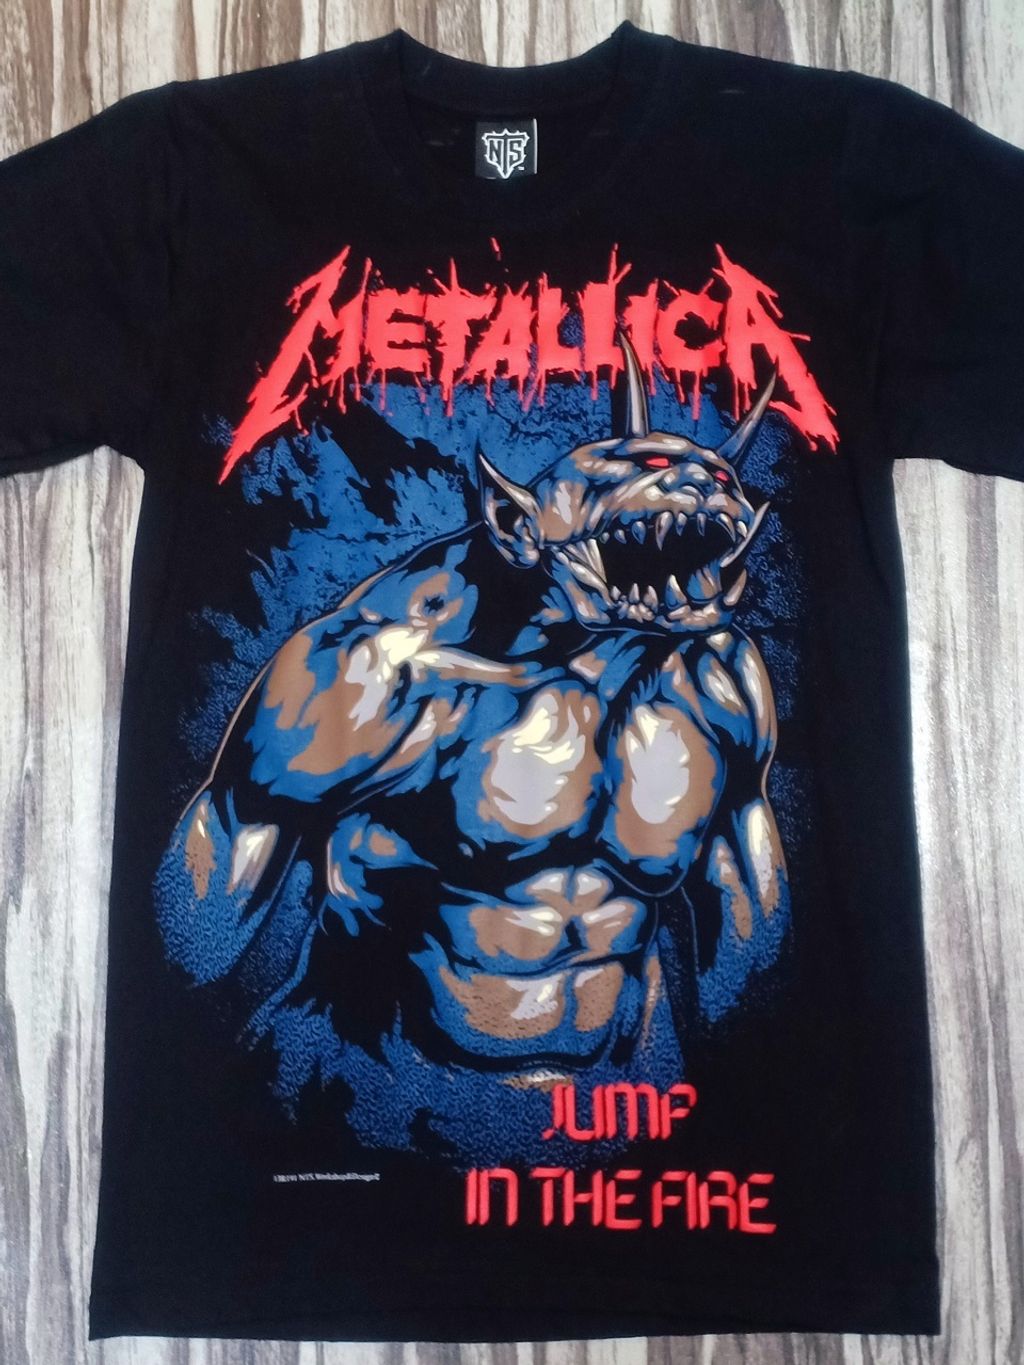 13R191 METALLICA HEAVY METAL ROCK BAND JUMP IN THE FIRE ALBUM COVER NTS  ORIGINAL NEW TYPE SYSTEM COTTON T-SHIRT – PREMIUM GRADE BLACK TIMBER NEW  TYPE SYSTEM MOAI SPEED HIGH QUALITY SILK